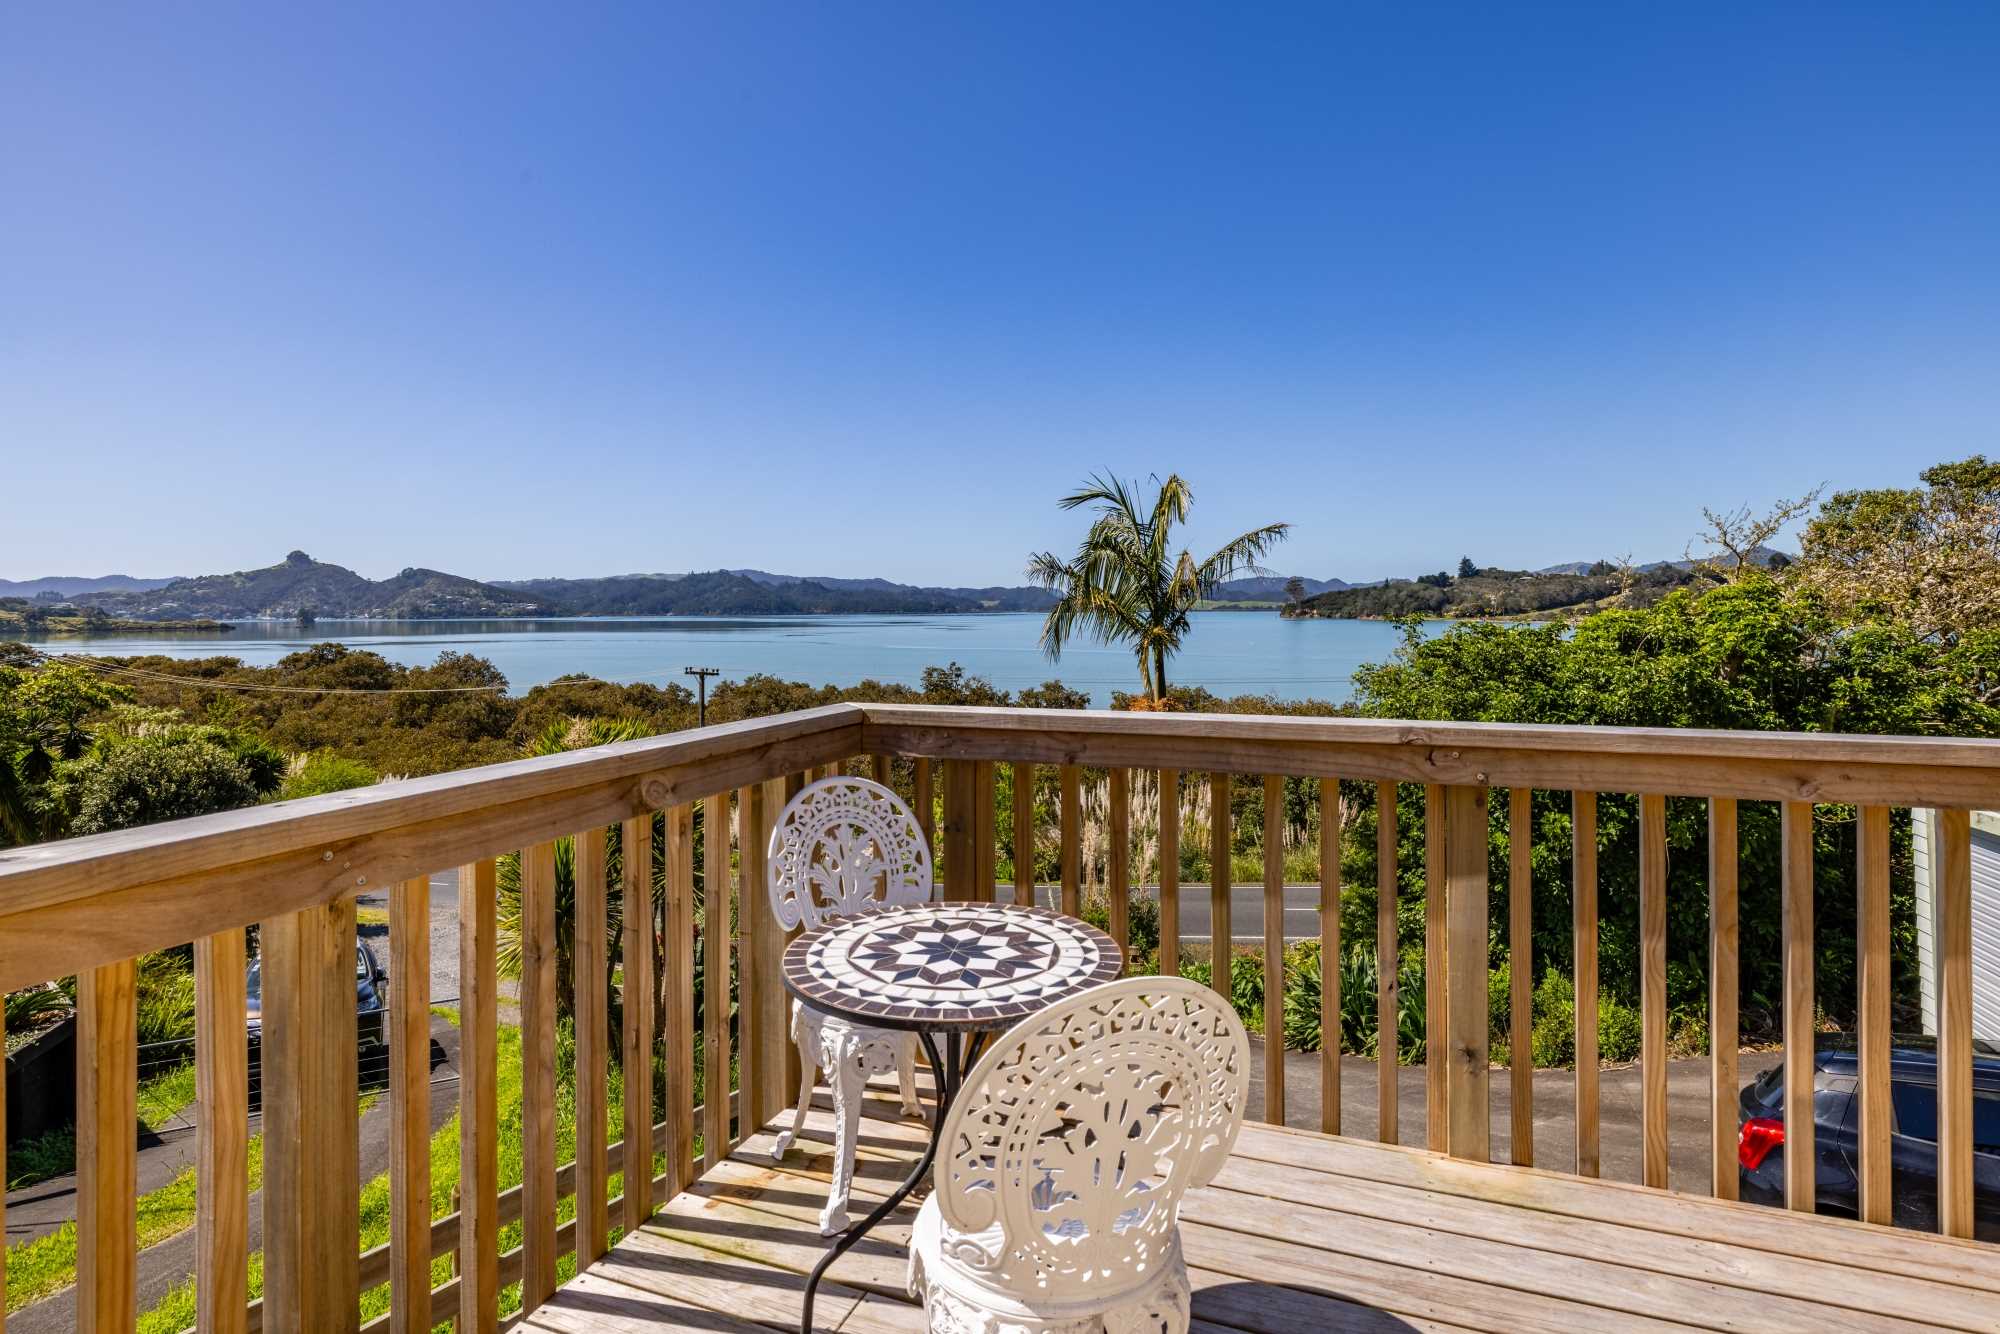 Real Estate For Sale Houses & Apartments : Waterfront views from Totara North home